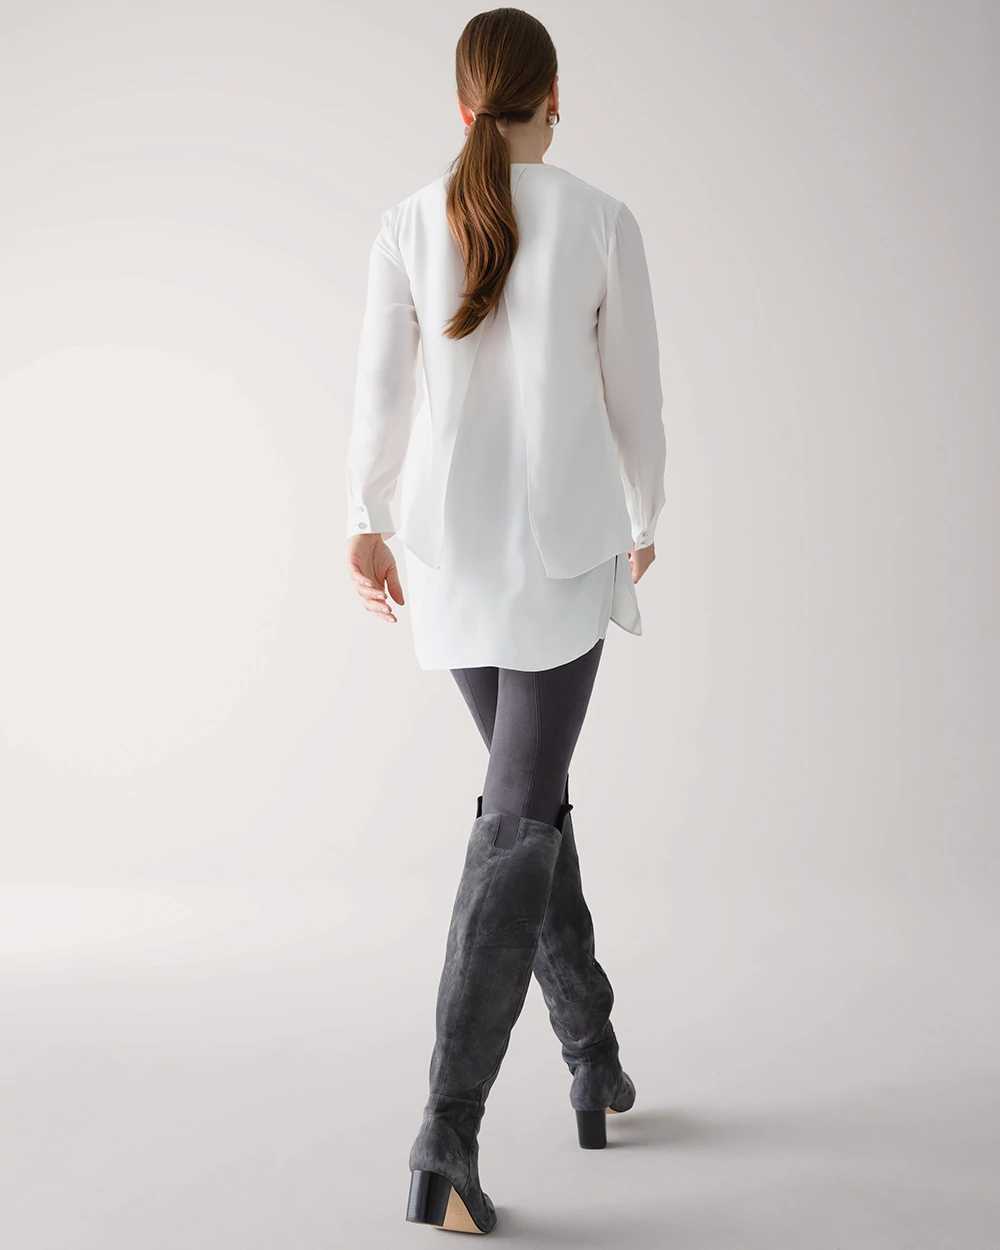 Long Sleeve V-Neck Tunic click to view larger image.